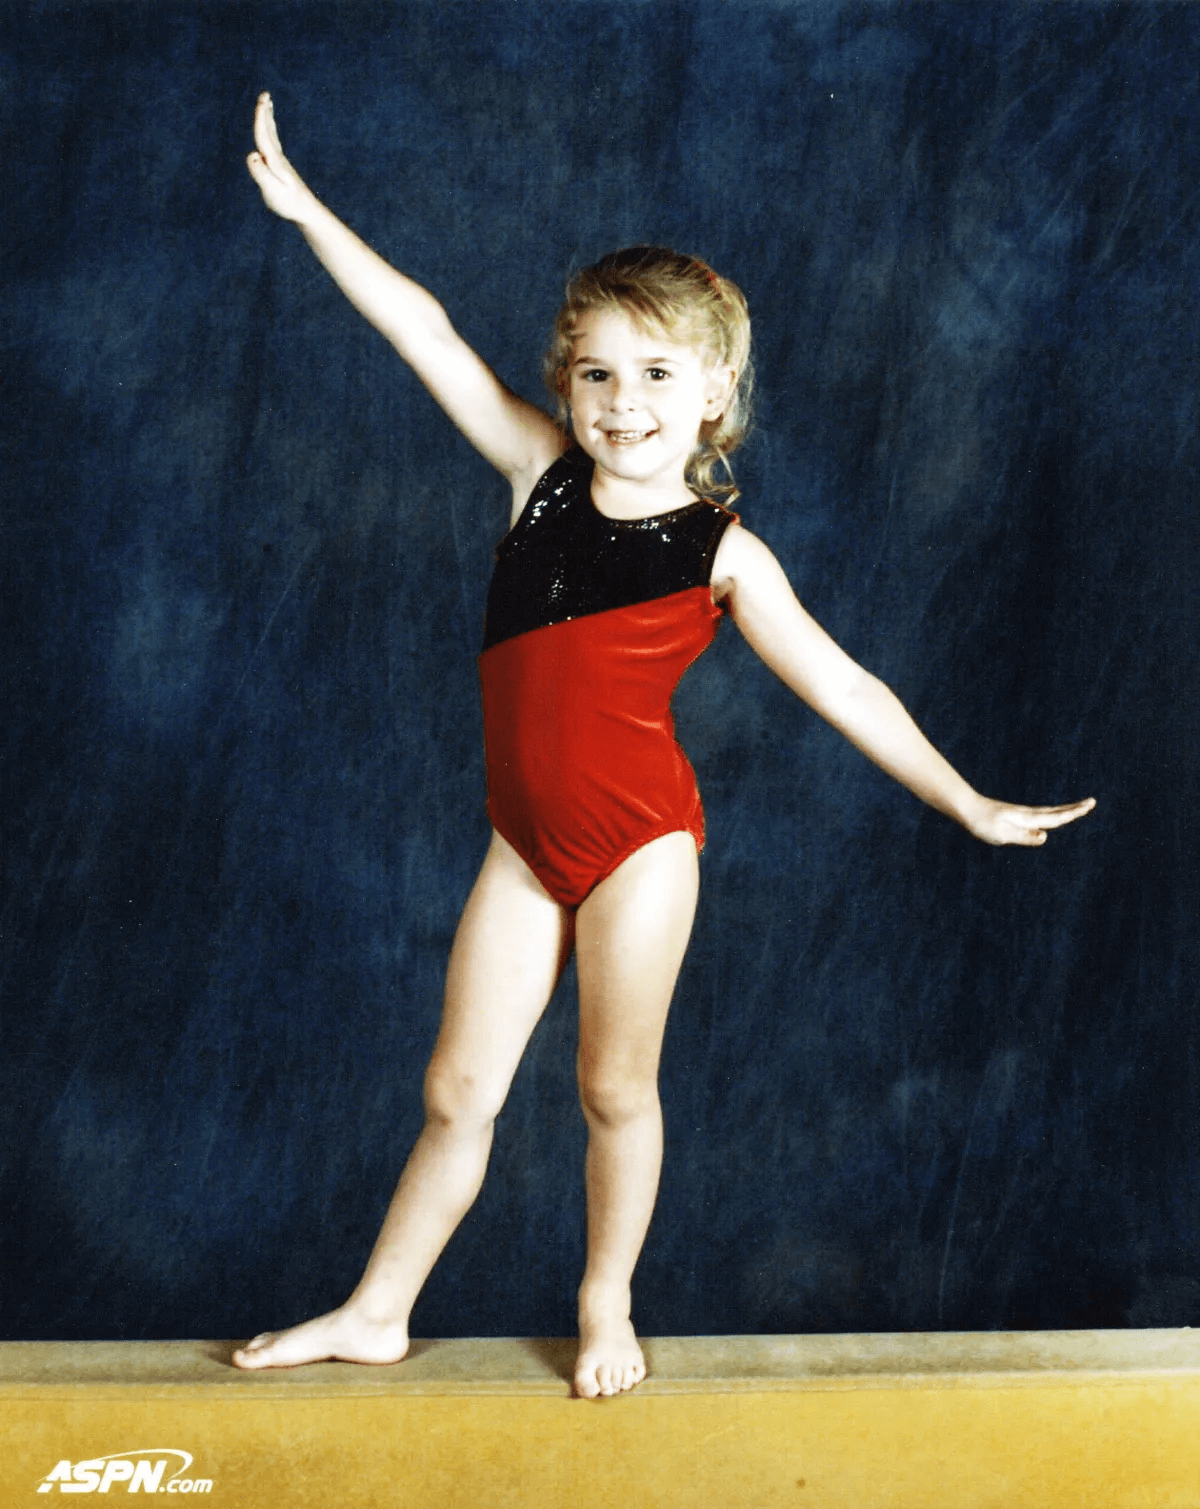 A young girl in a red and black leotard is standing on one foot.